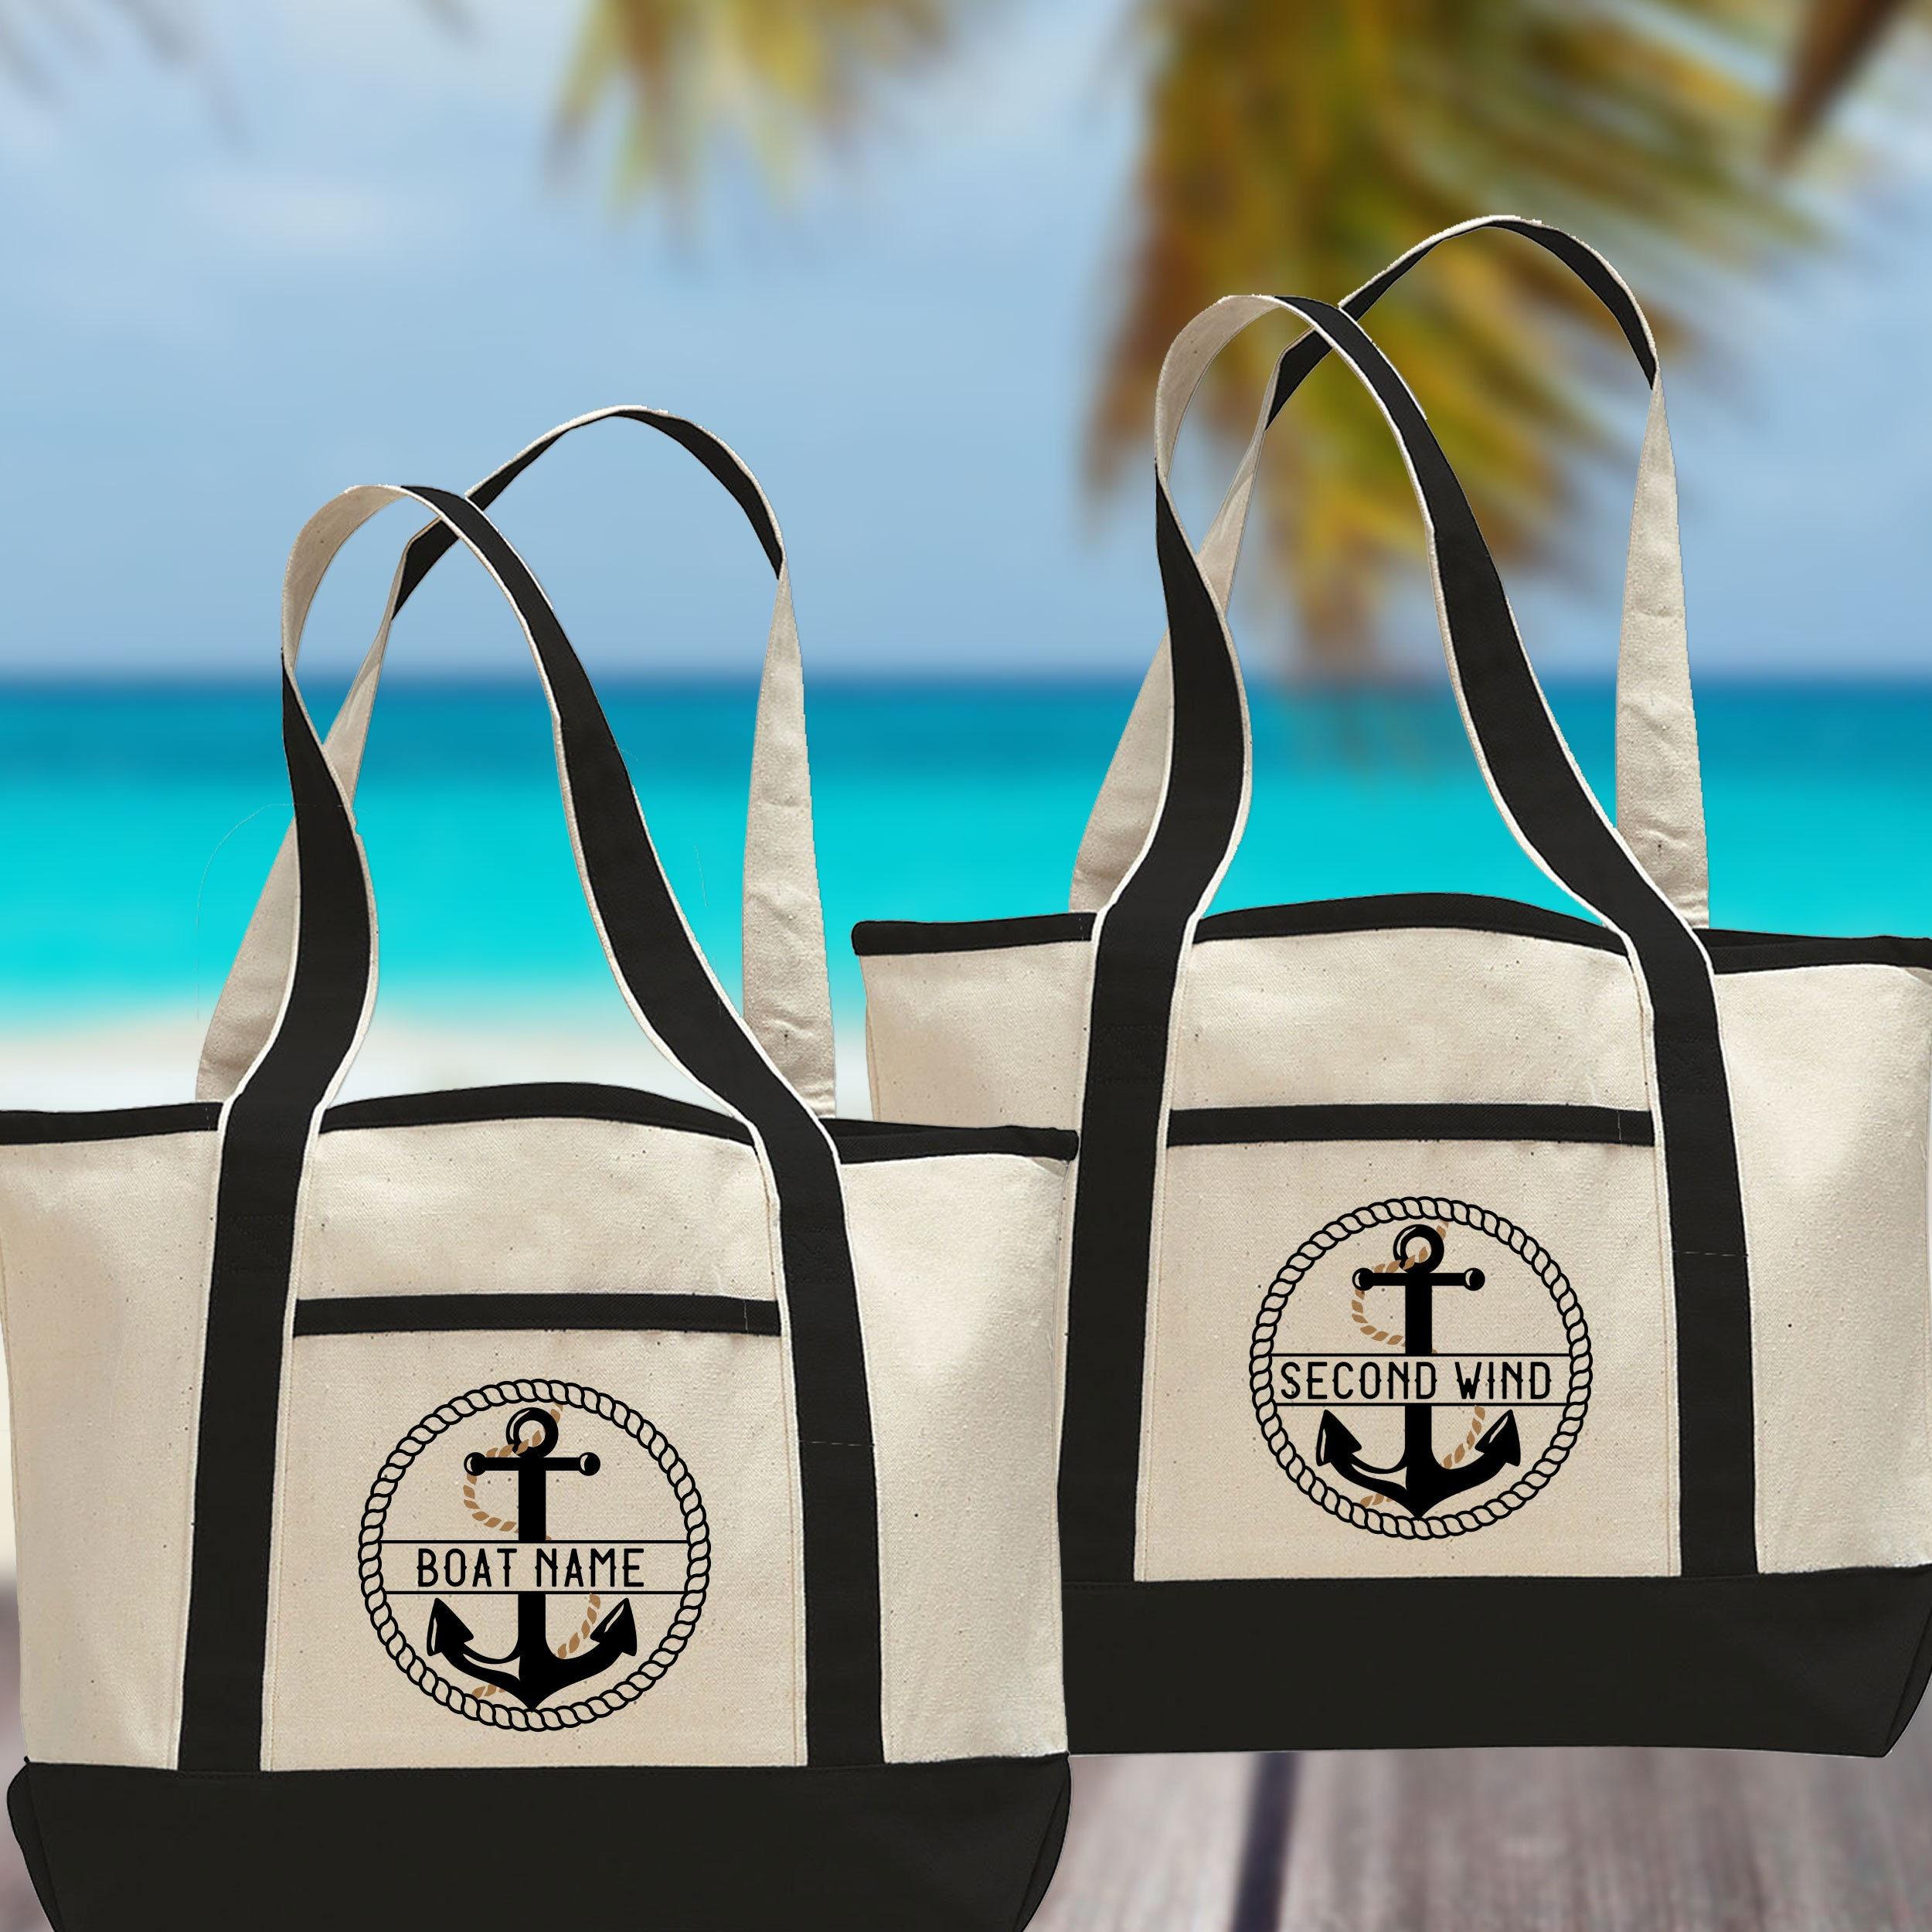 Custom Boat Tote, Ironic Boat Tote, Boat Tote With Pockets